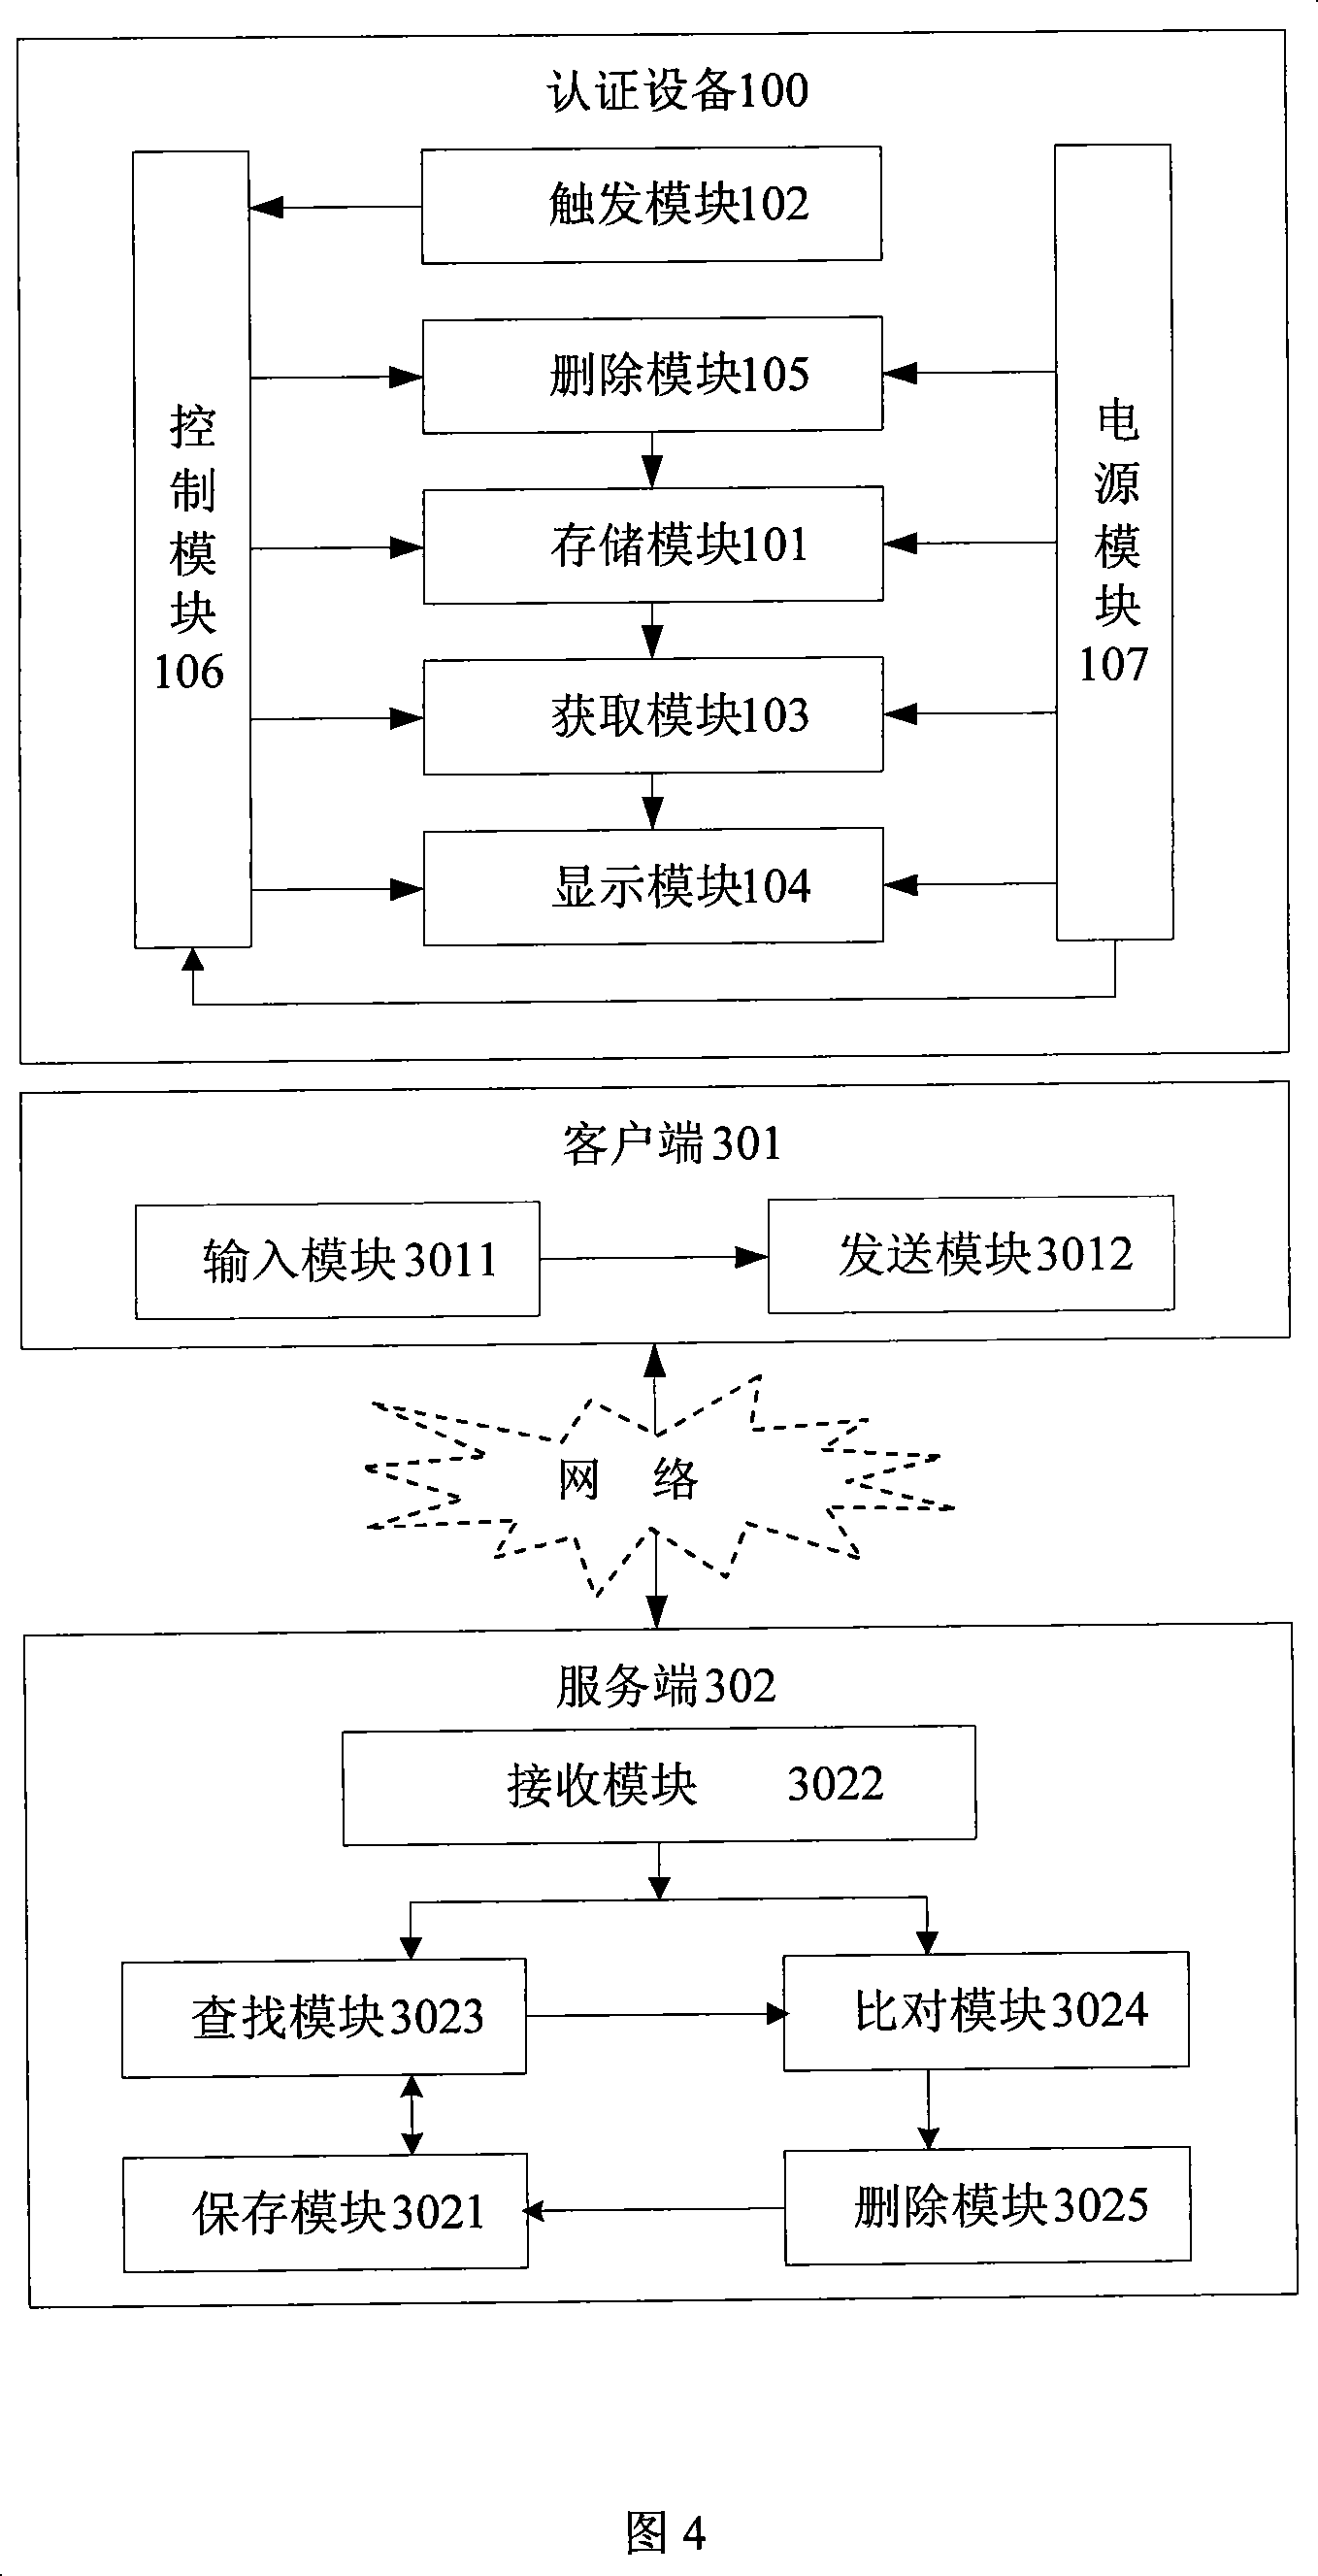 Authentication device, method and system